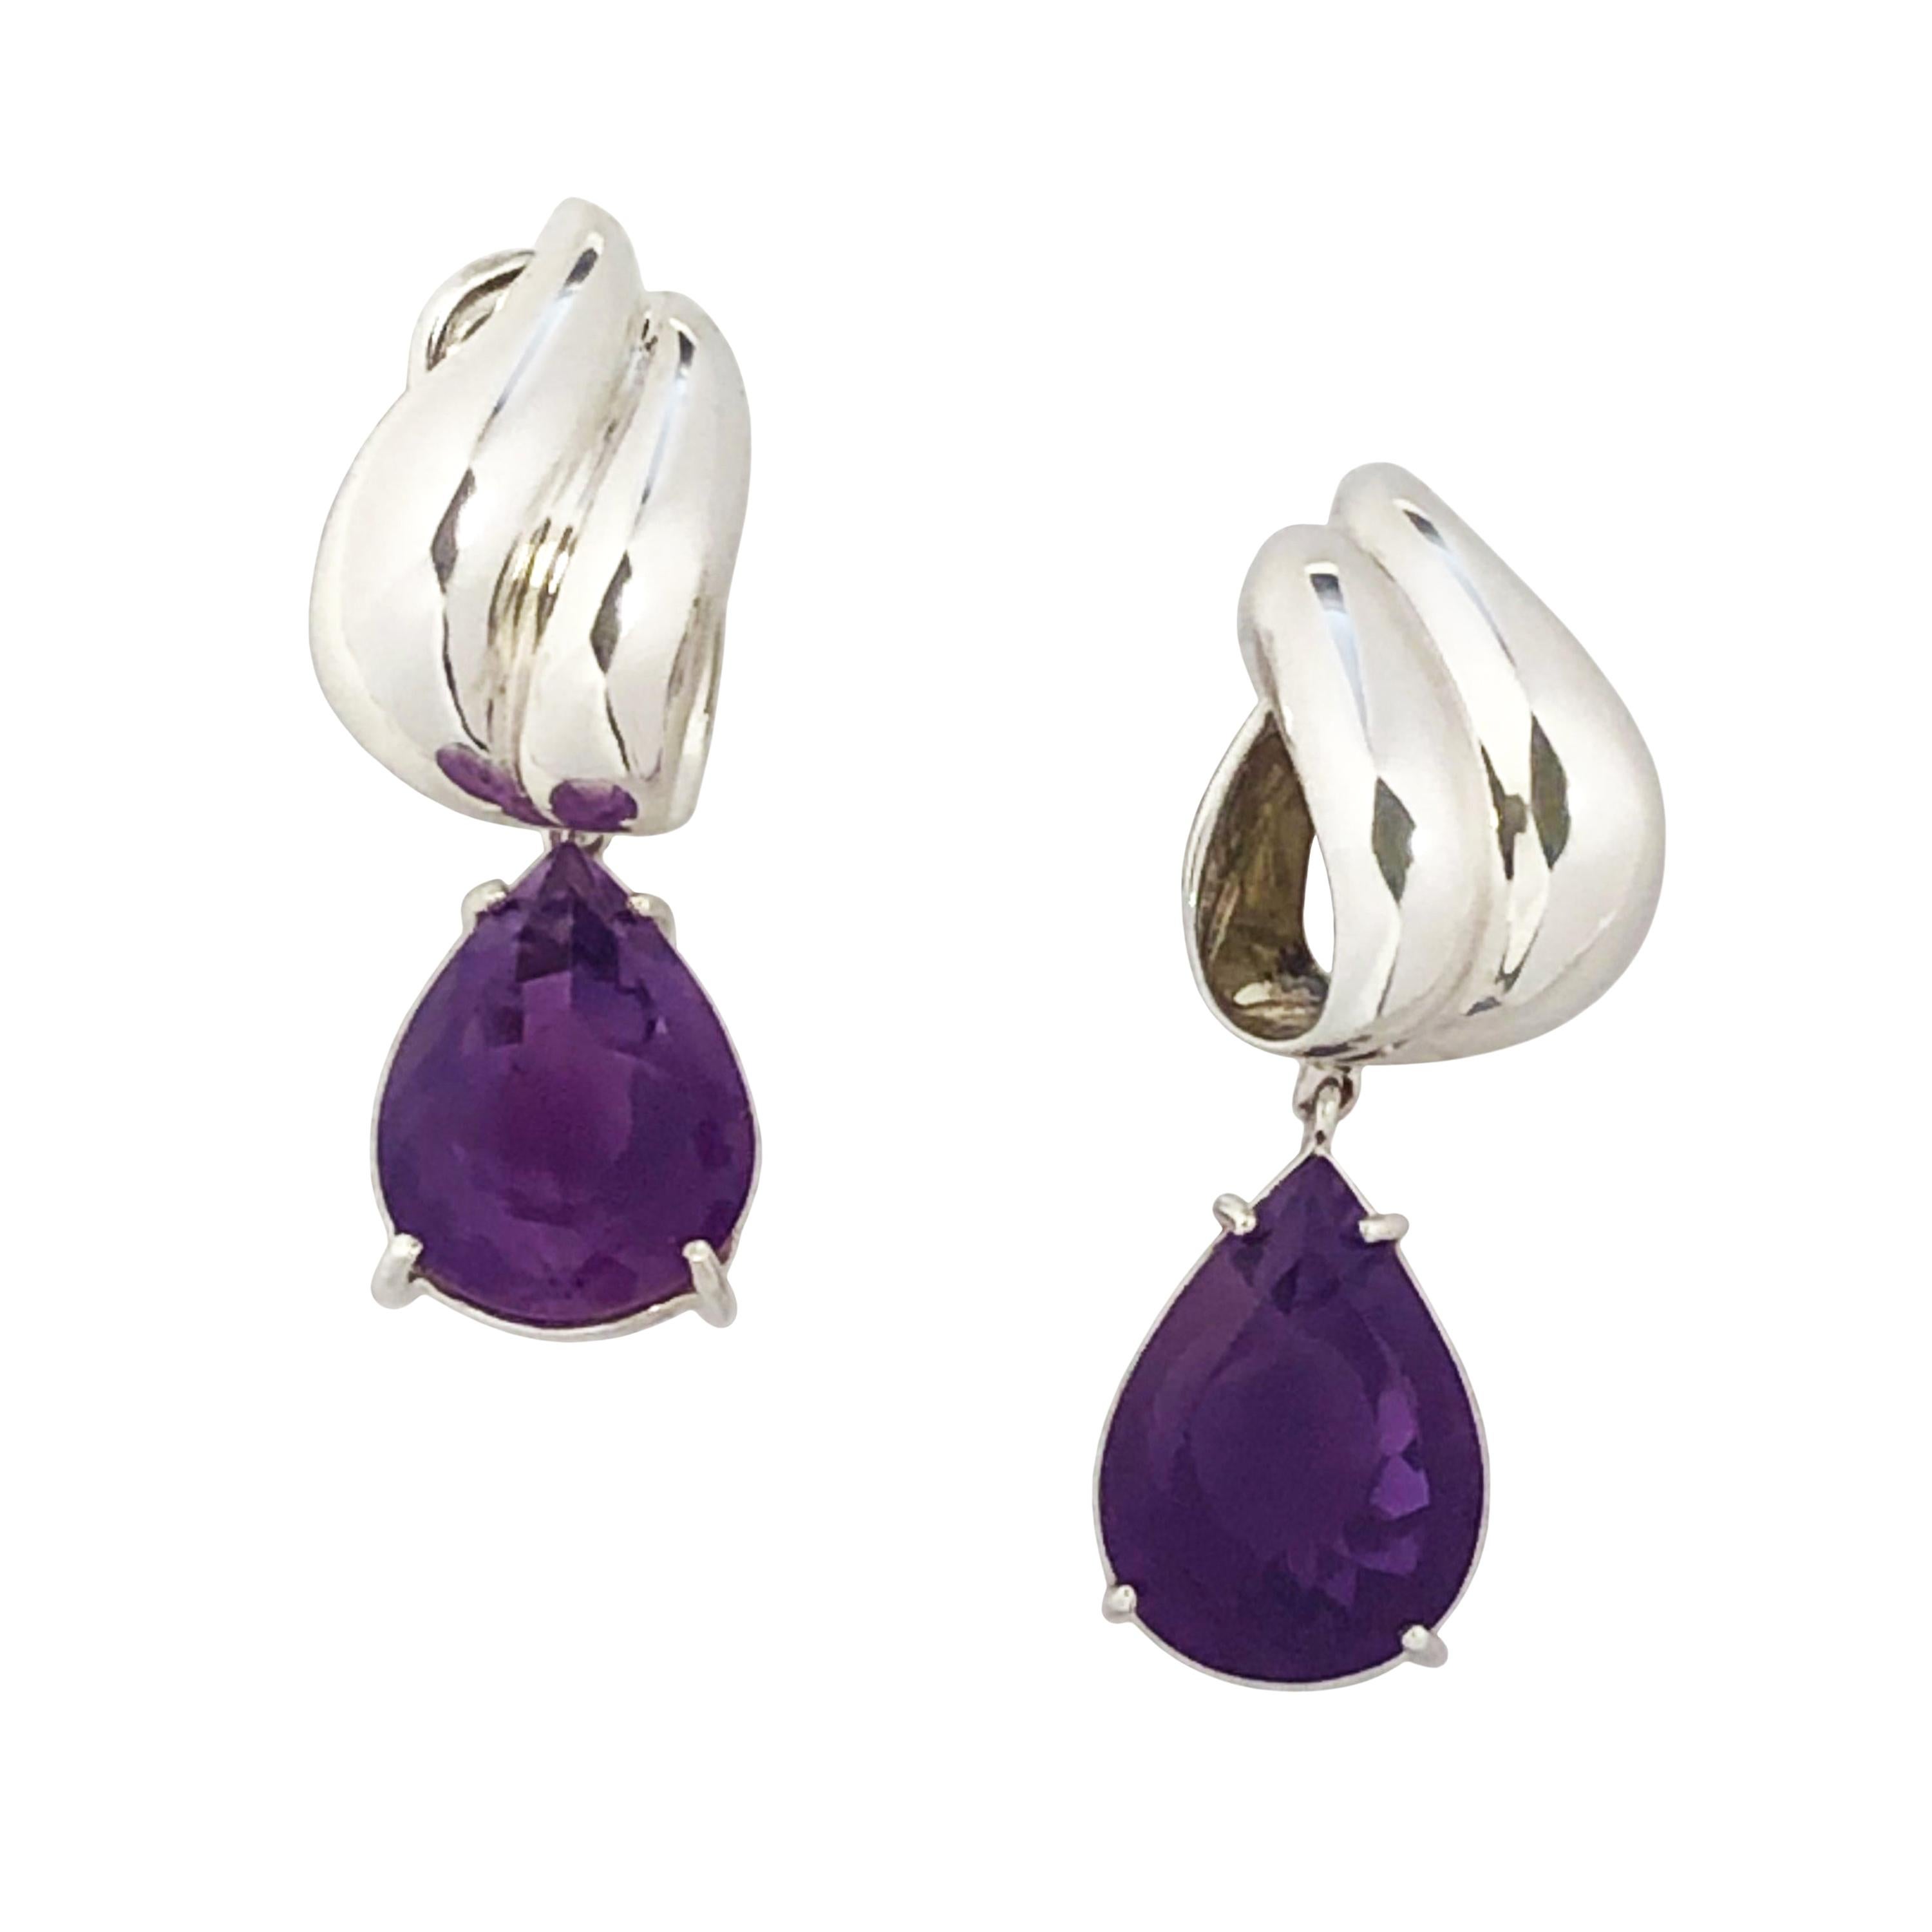 Tiffany & Co. Sterling and Amethyst Earrings